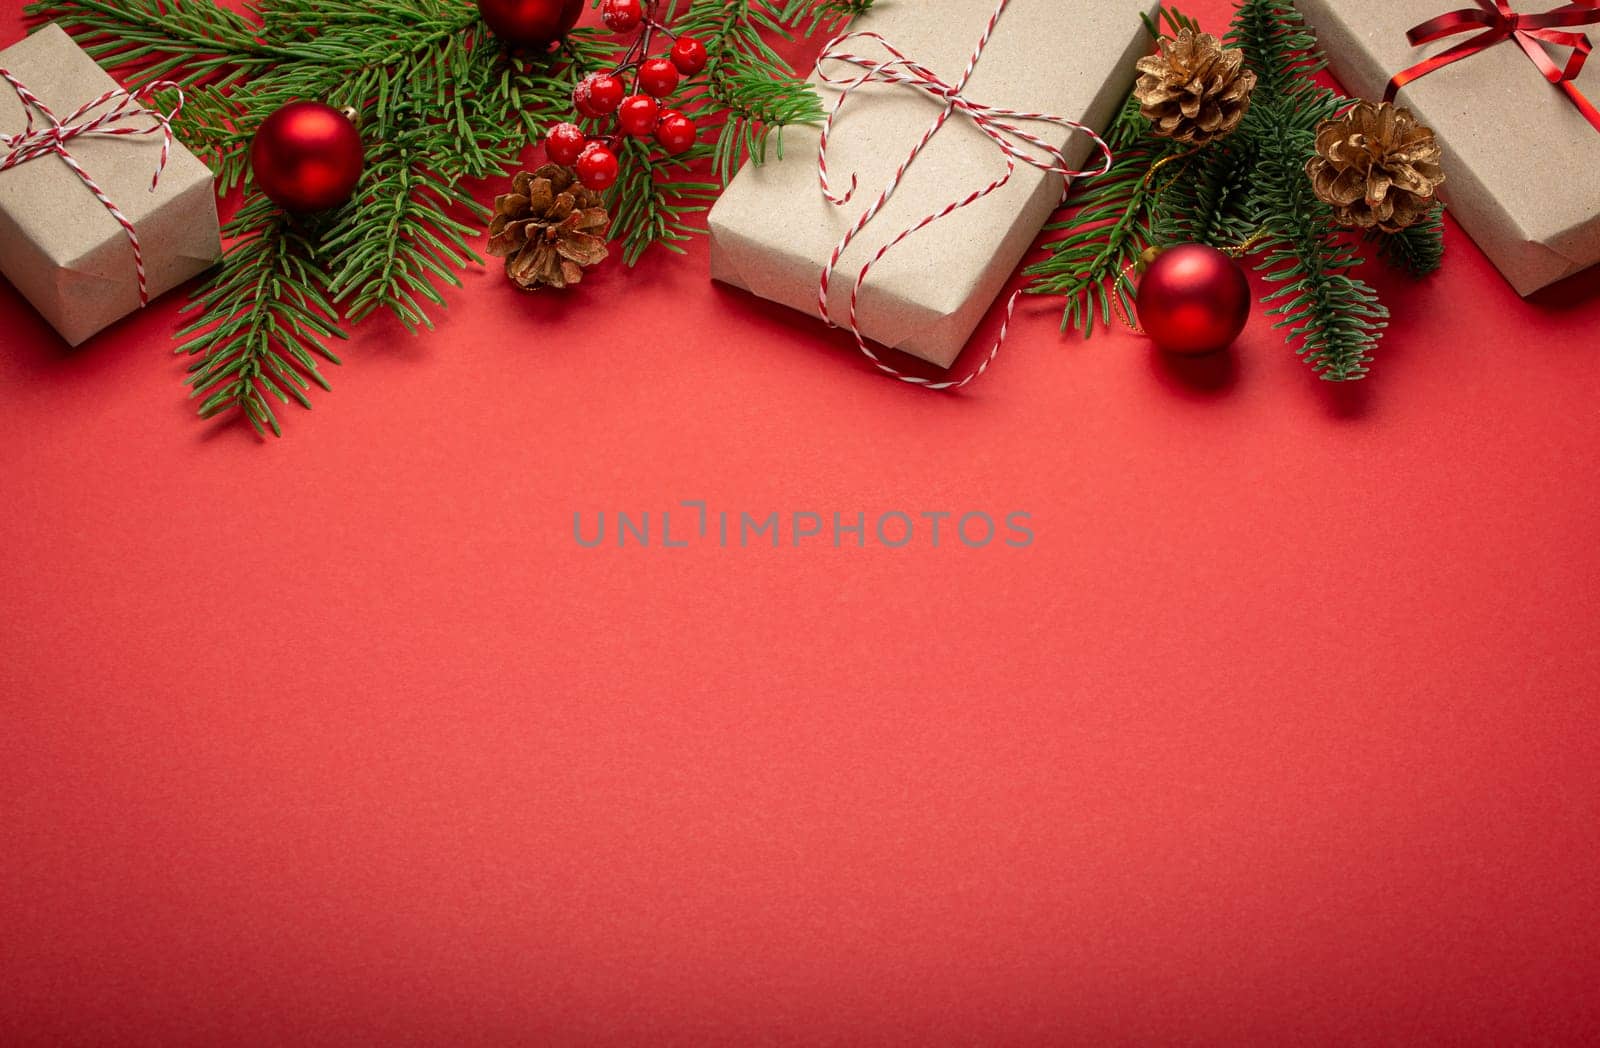 Christmas or New Year celebration red paper festive background with decoration fir tree, wrapped present boxes, cones, berries, sparkly red balls. Space for text. by its_al_dente